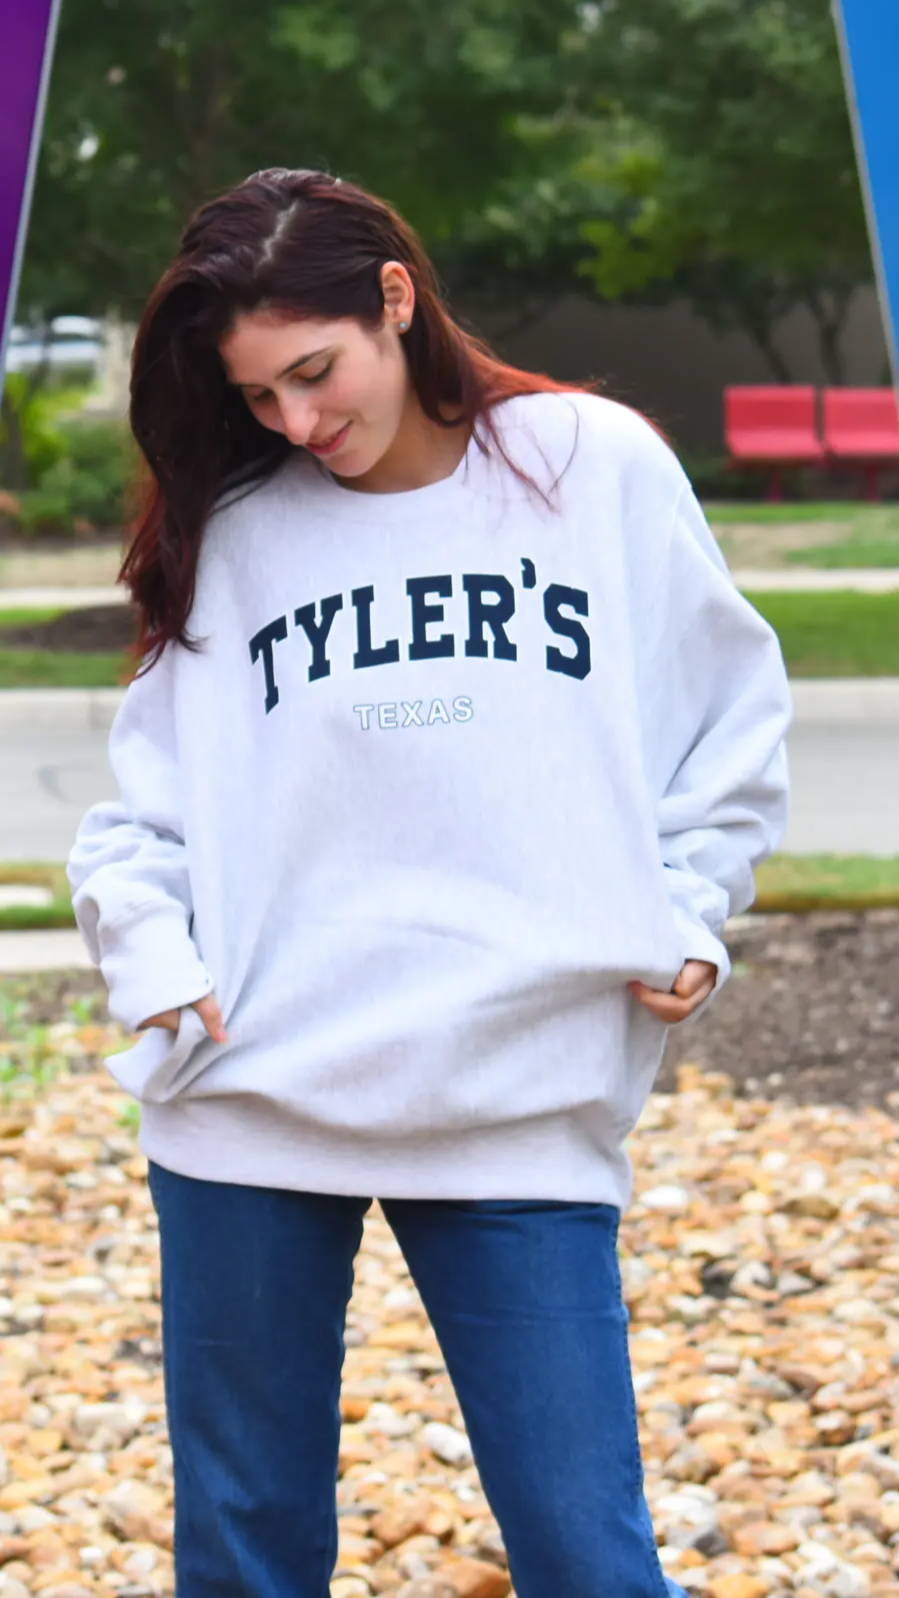 Young woman wearing a TYLER'S sweatshirt in the park